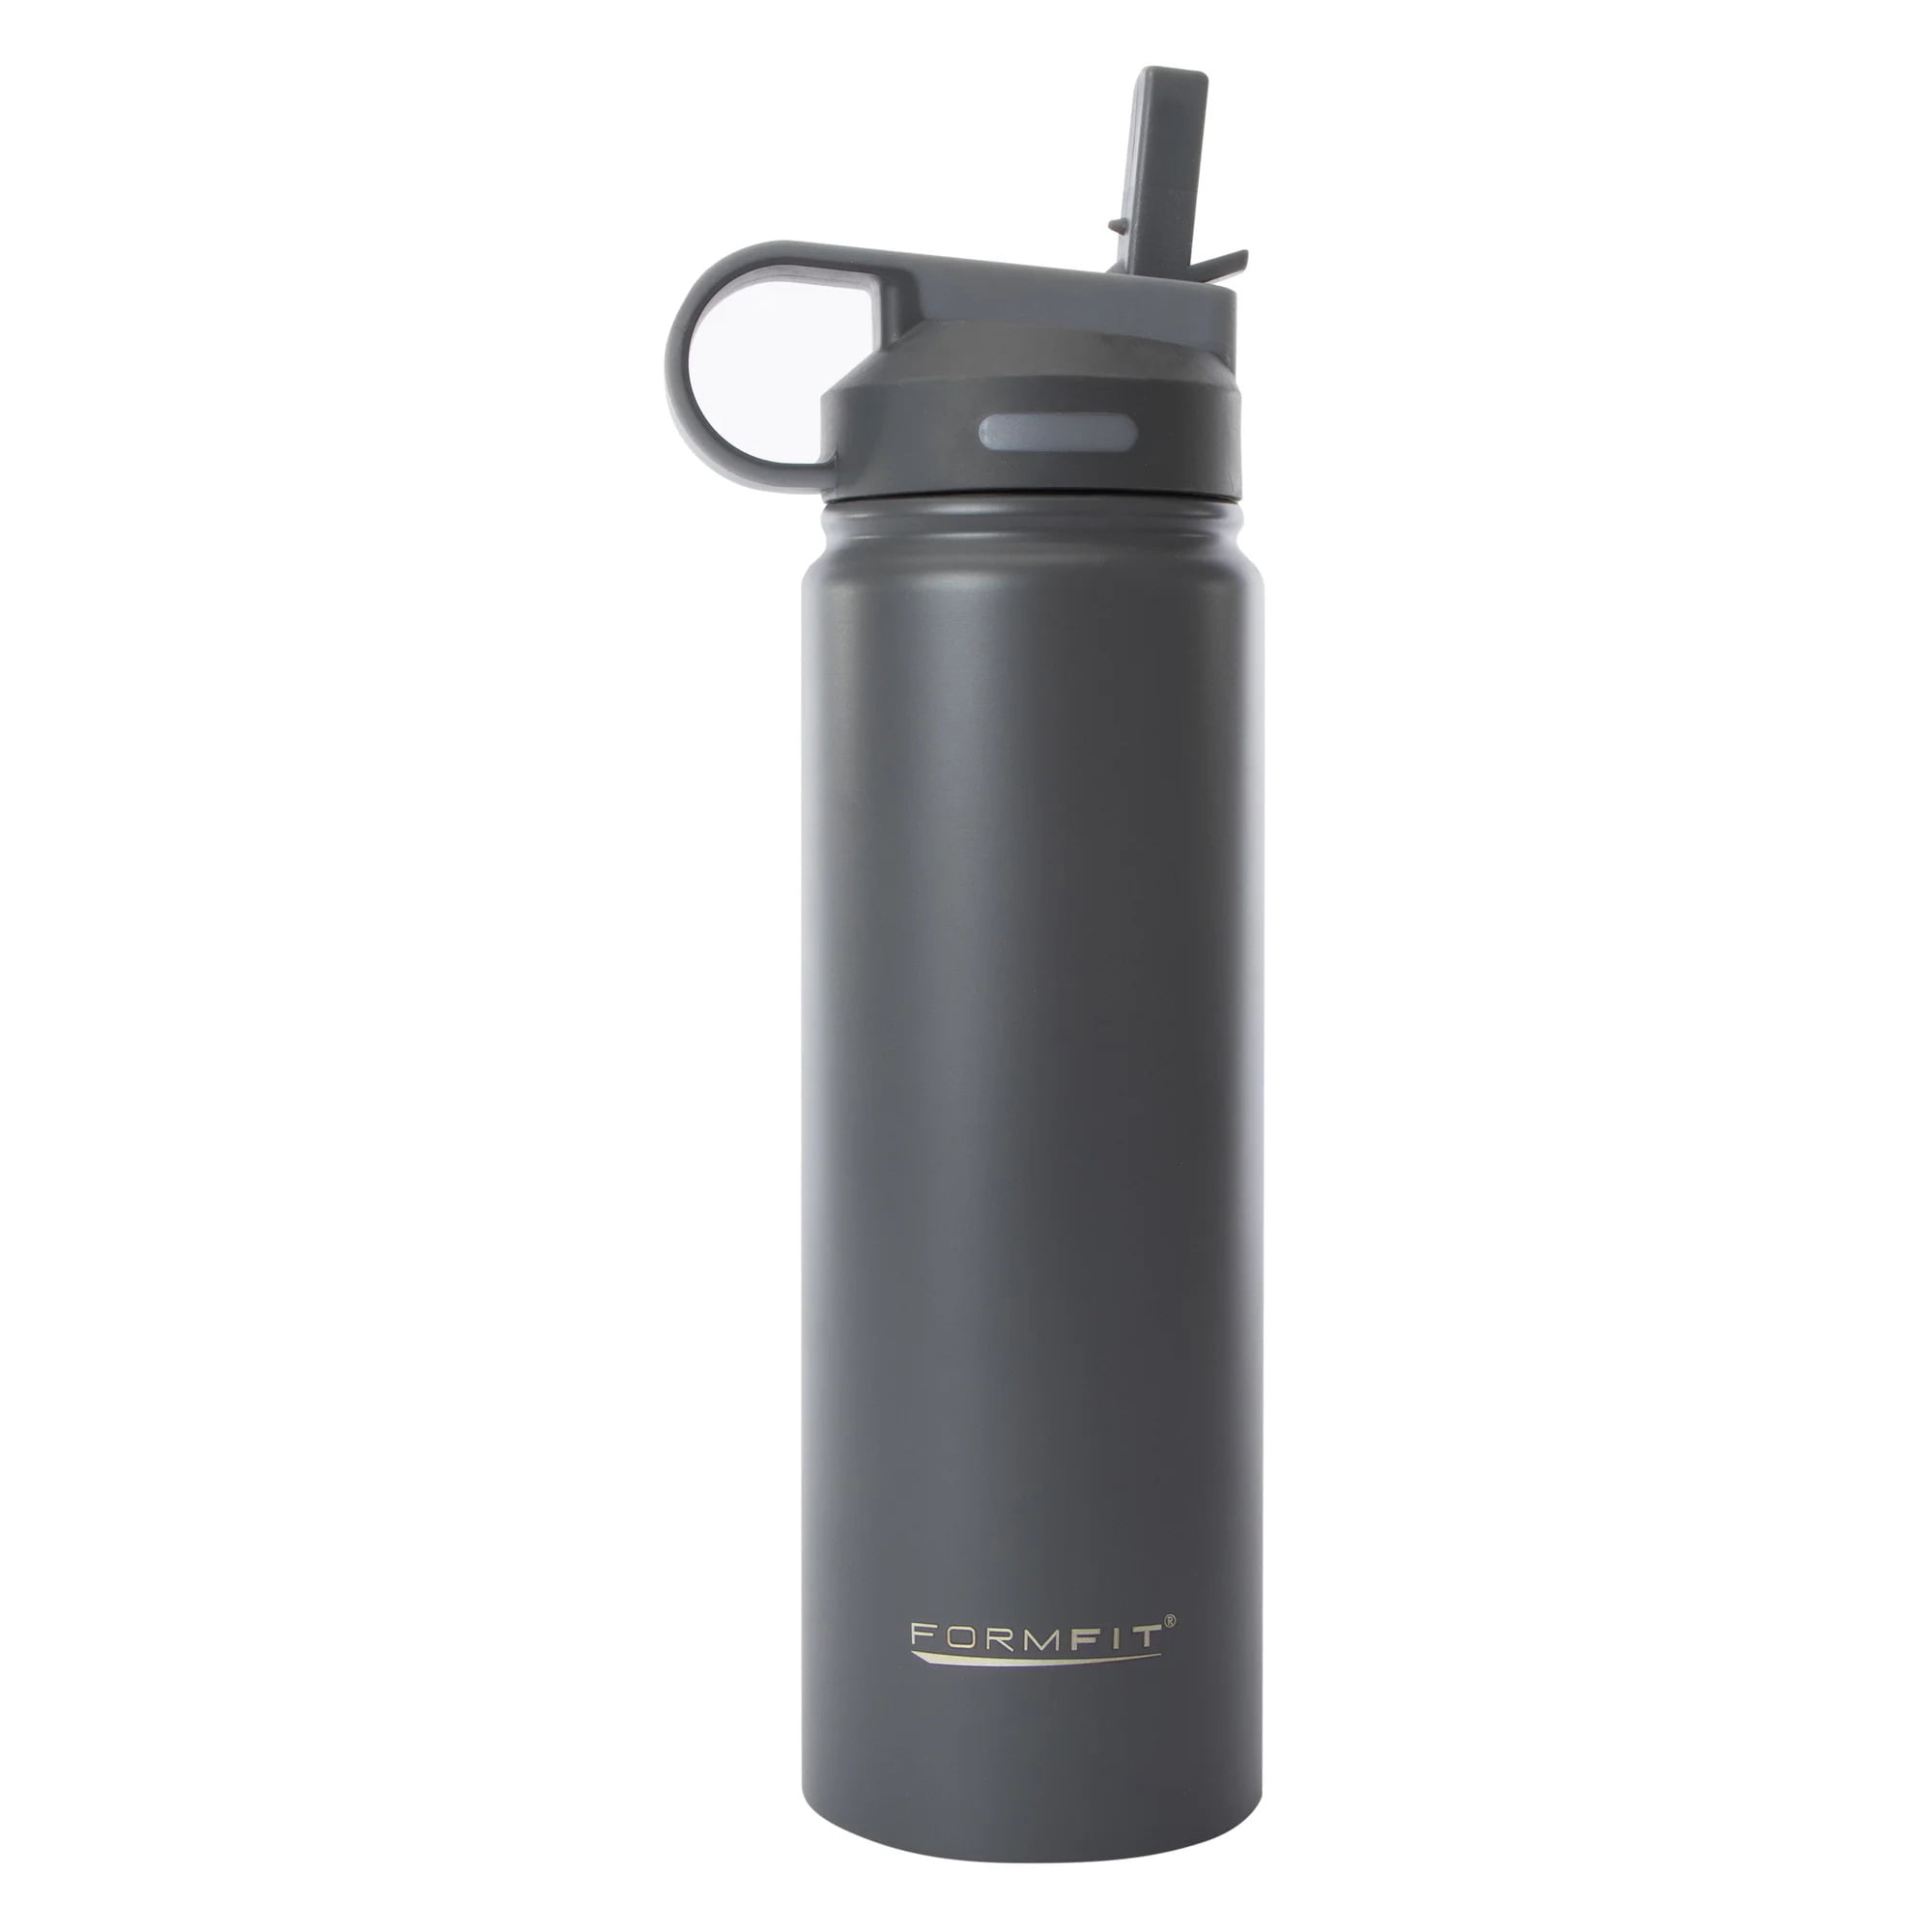 UPORS Stainless Steel Sport Water Bottle 600ml/800ml Large